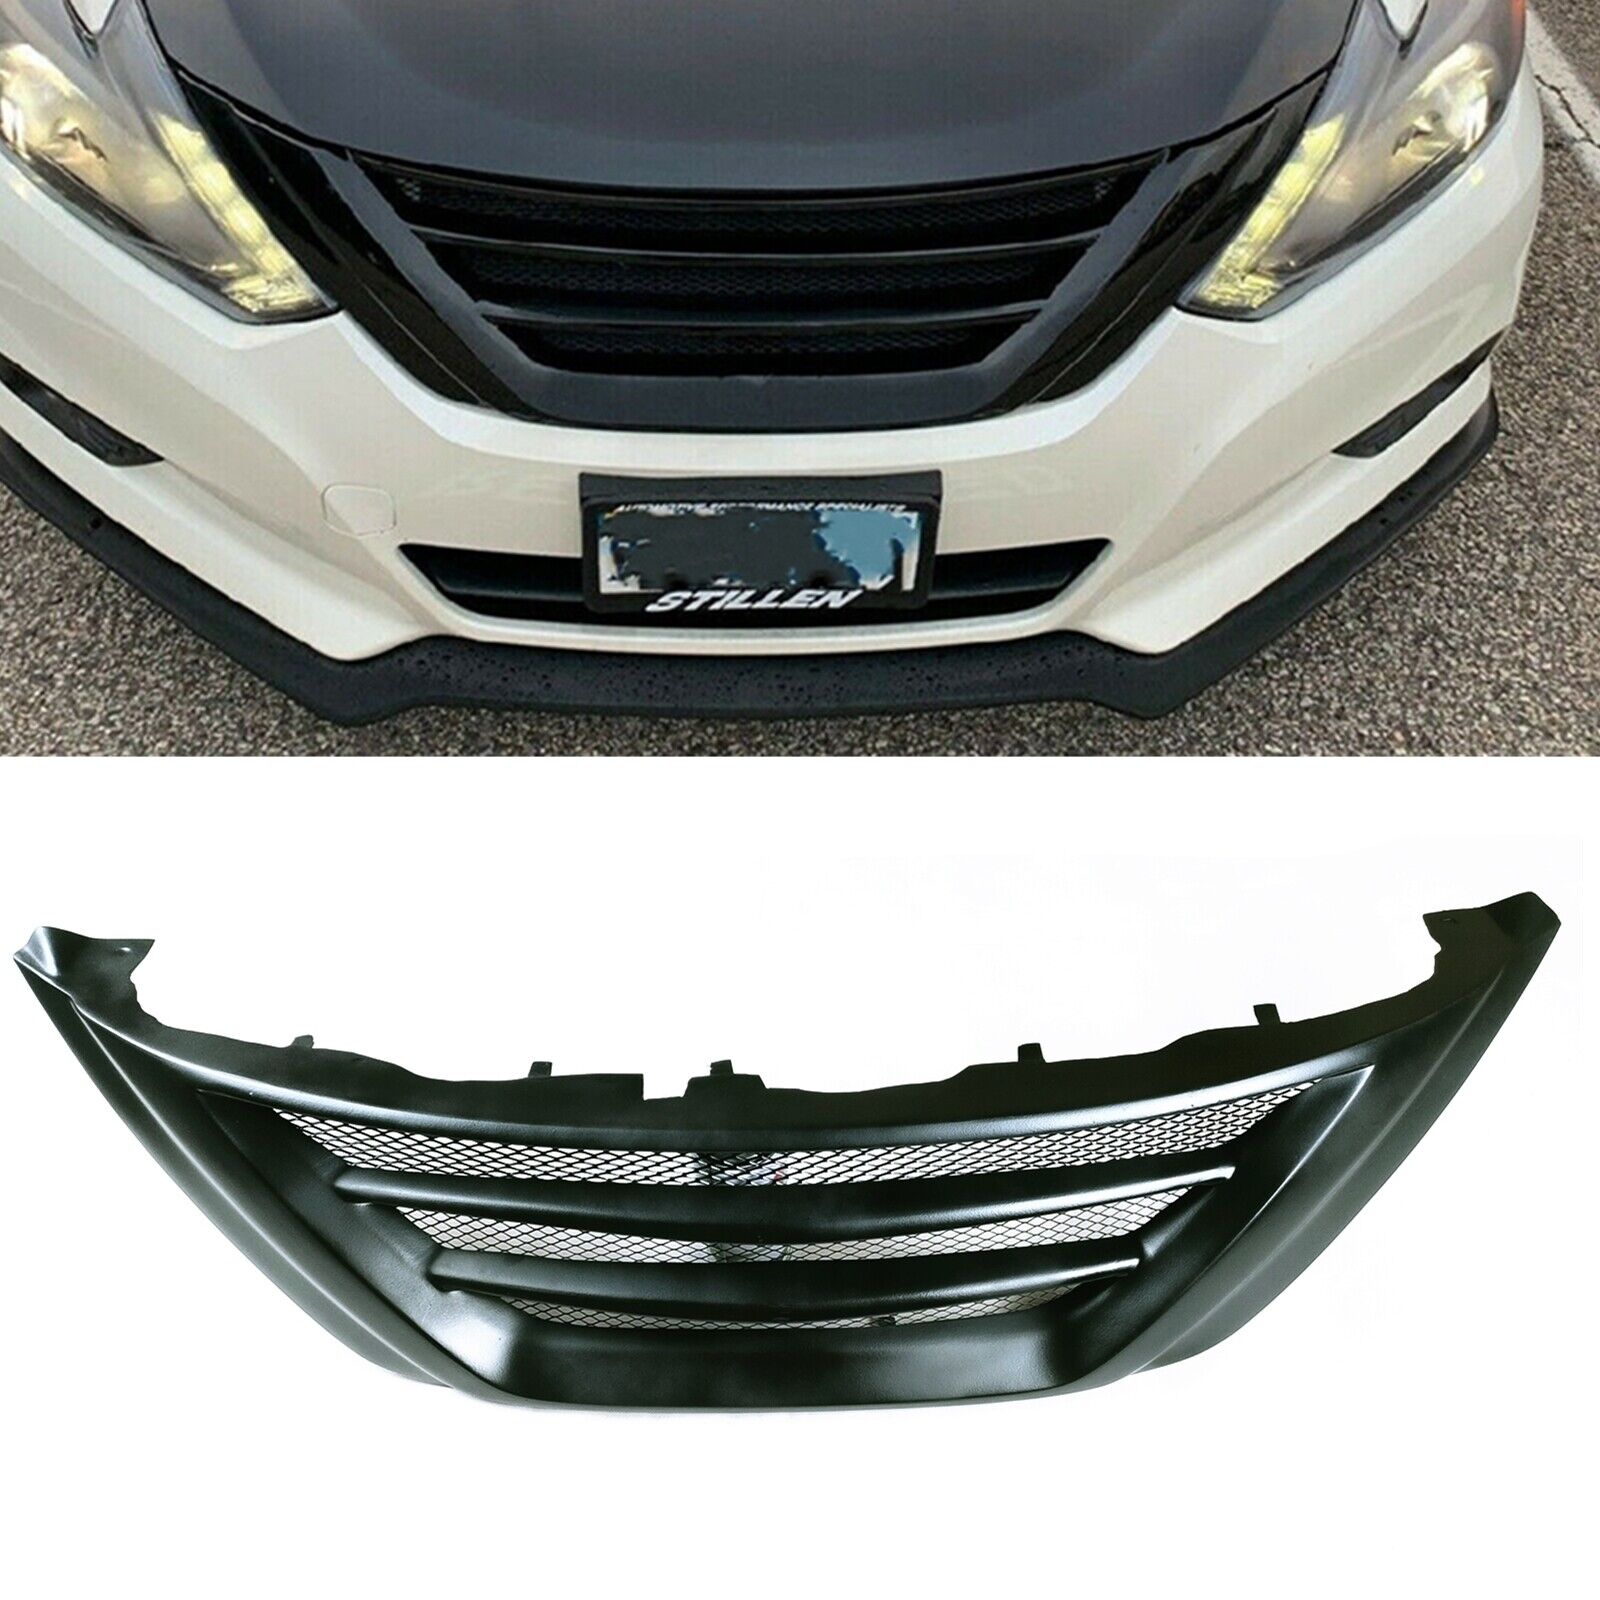 FOR NS ALTIMA 2016 2017 2018 FRONT BUMPER LOWER GRILLE BLACK